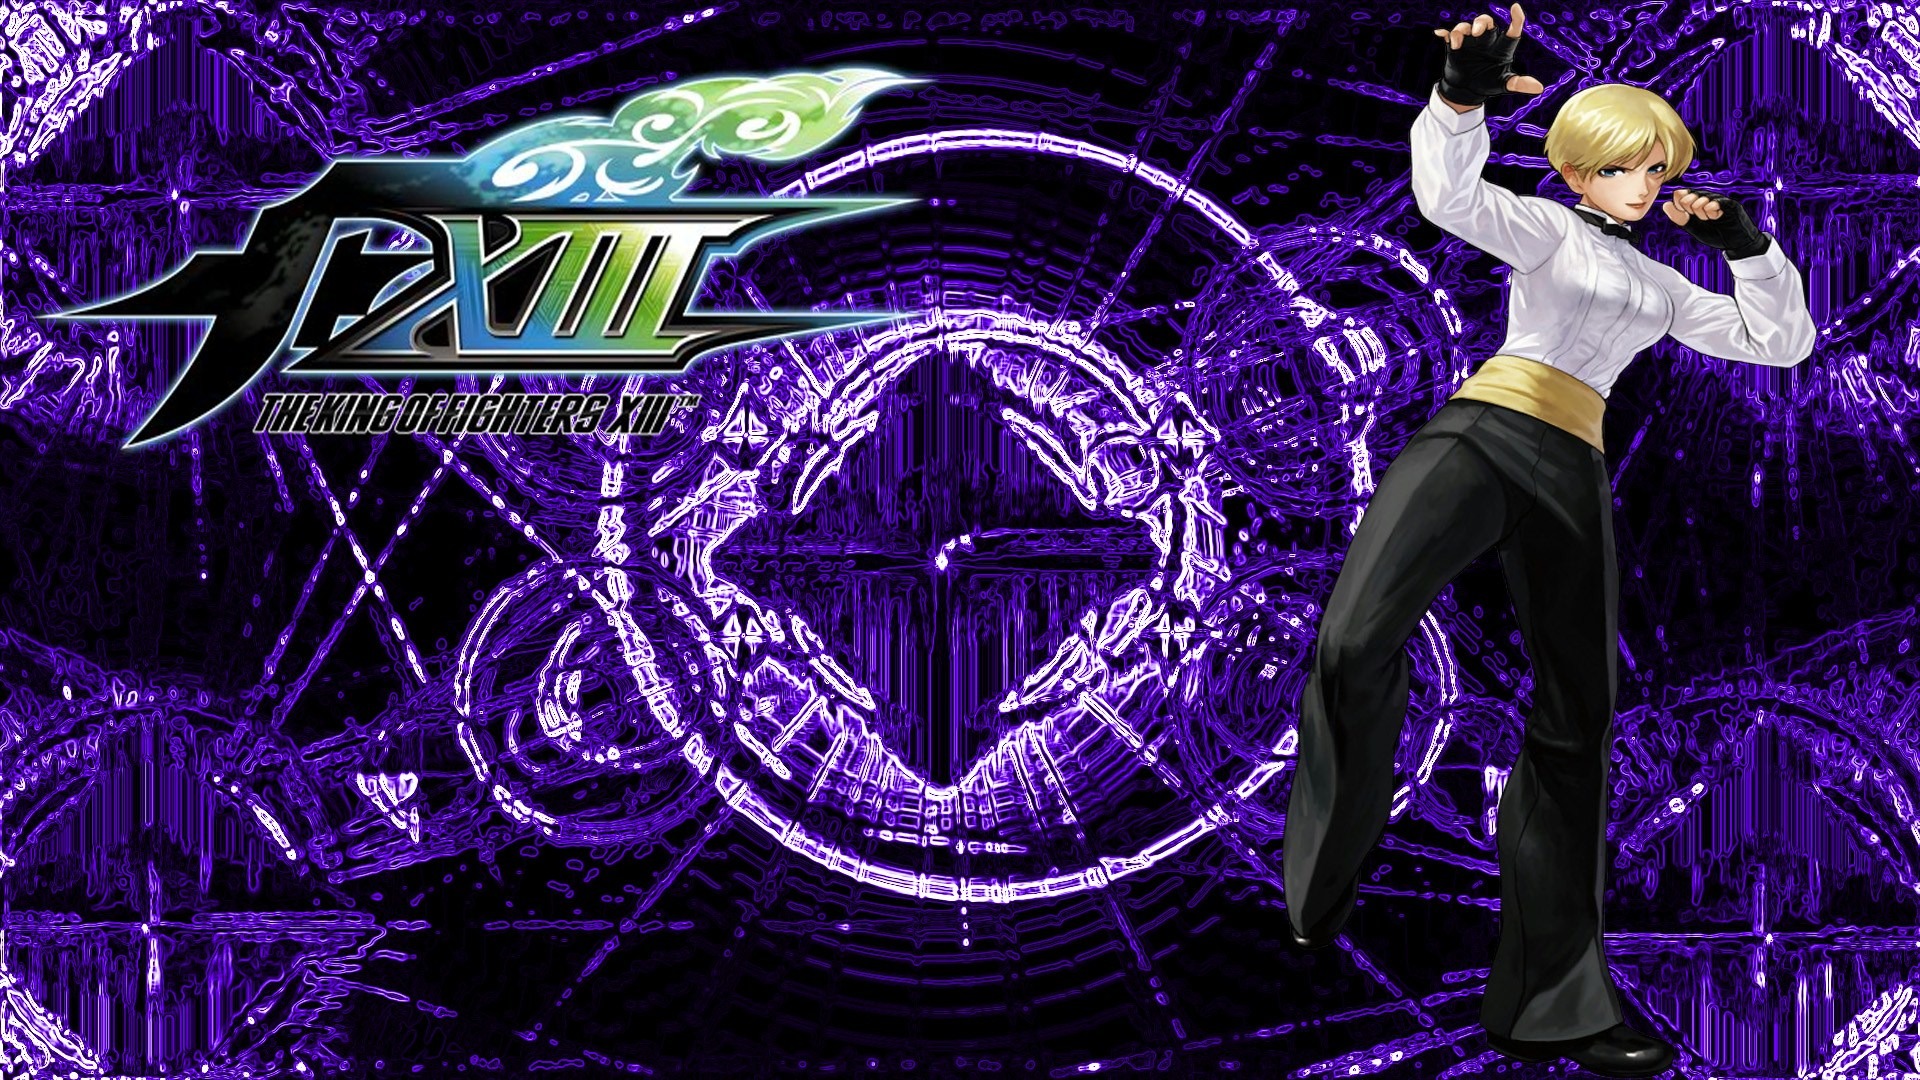 The King of Fighters XIII wallpapers #9 - 1920x1080